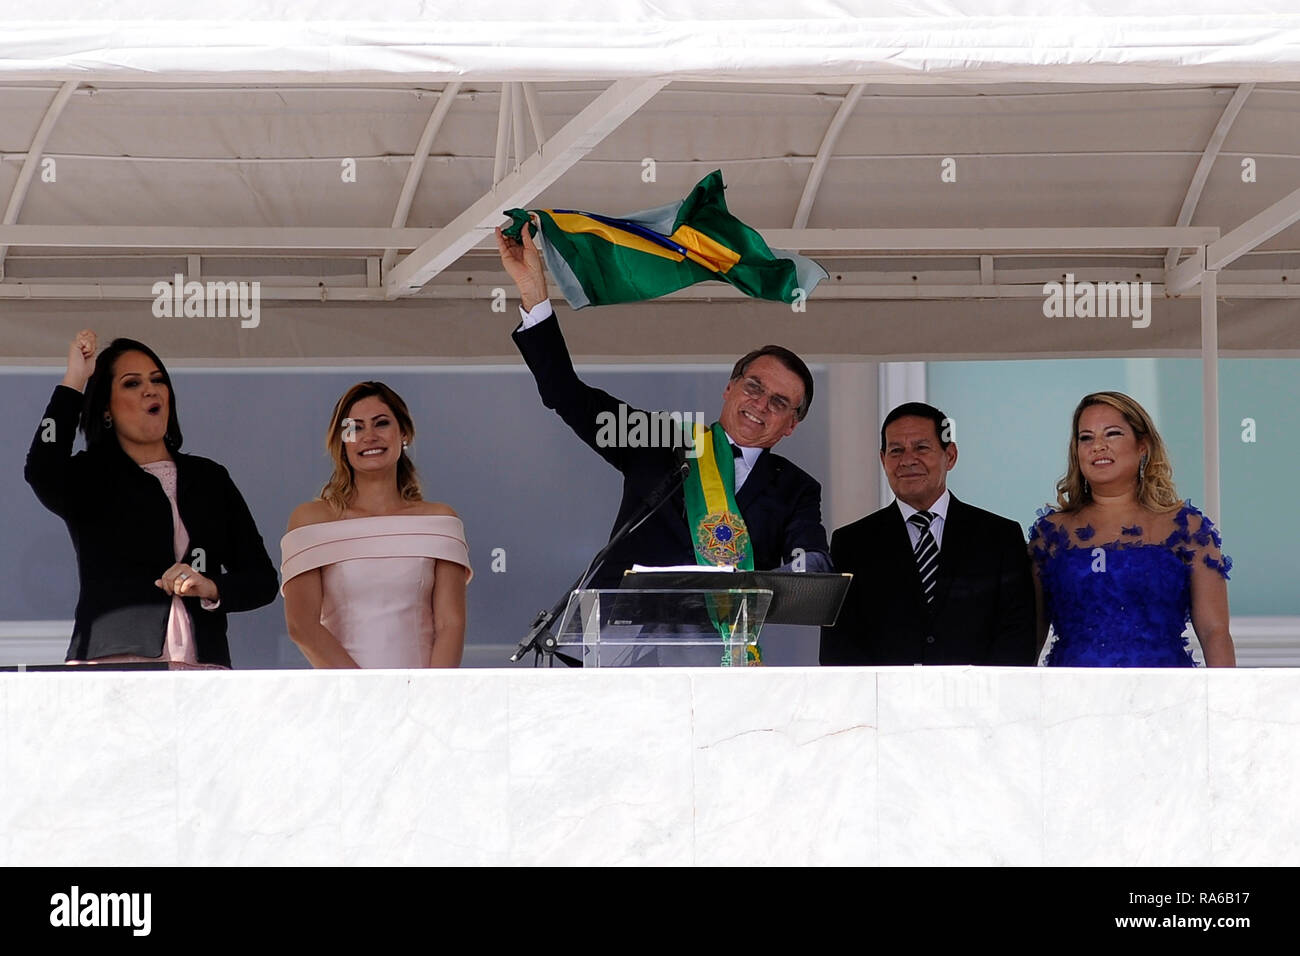 Brasilia, Brazil. 01st Jan, 2019. Brazil's new president Jair Bolsonaro (M) waves to the crowd from the Planalto presidential palace. Next to him are his wife Michelle Bolsonaro (2nd from left), Vice President Hamilton Mourao (2nd from right) and his wife Paula Mourao (right). The ultra-right ex-military Jair Bolsonaro has been sworn in as the new president of Brazil. The 63-year-old took his oath of office in Congress on Tuesday. Credit: Alan Morici/dpa/Alamy Live News Stock Photo